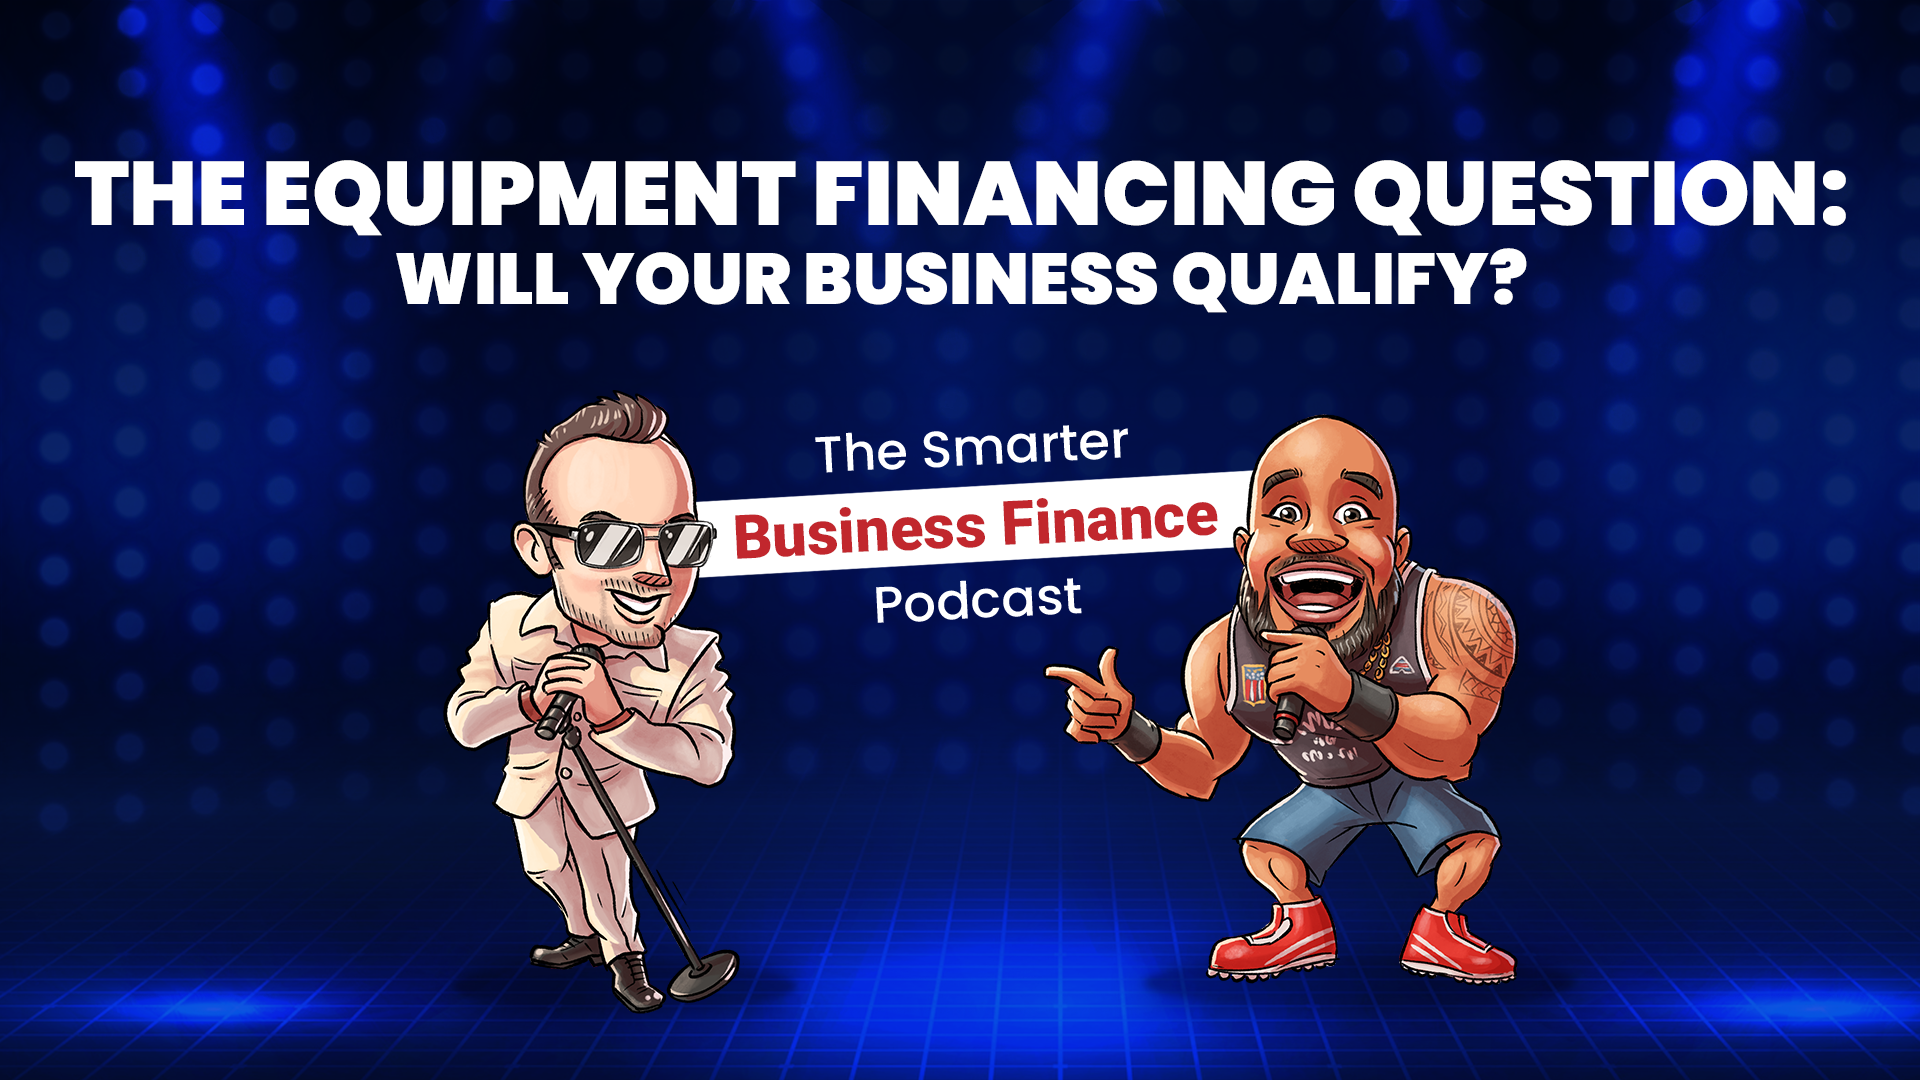 The Equipment Financing Question: Will Your Business Qualify?